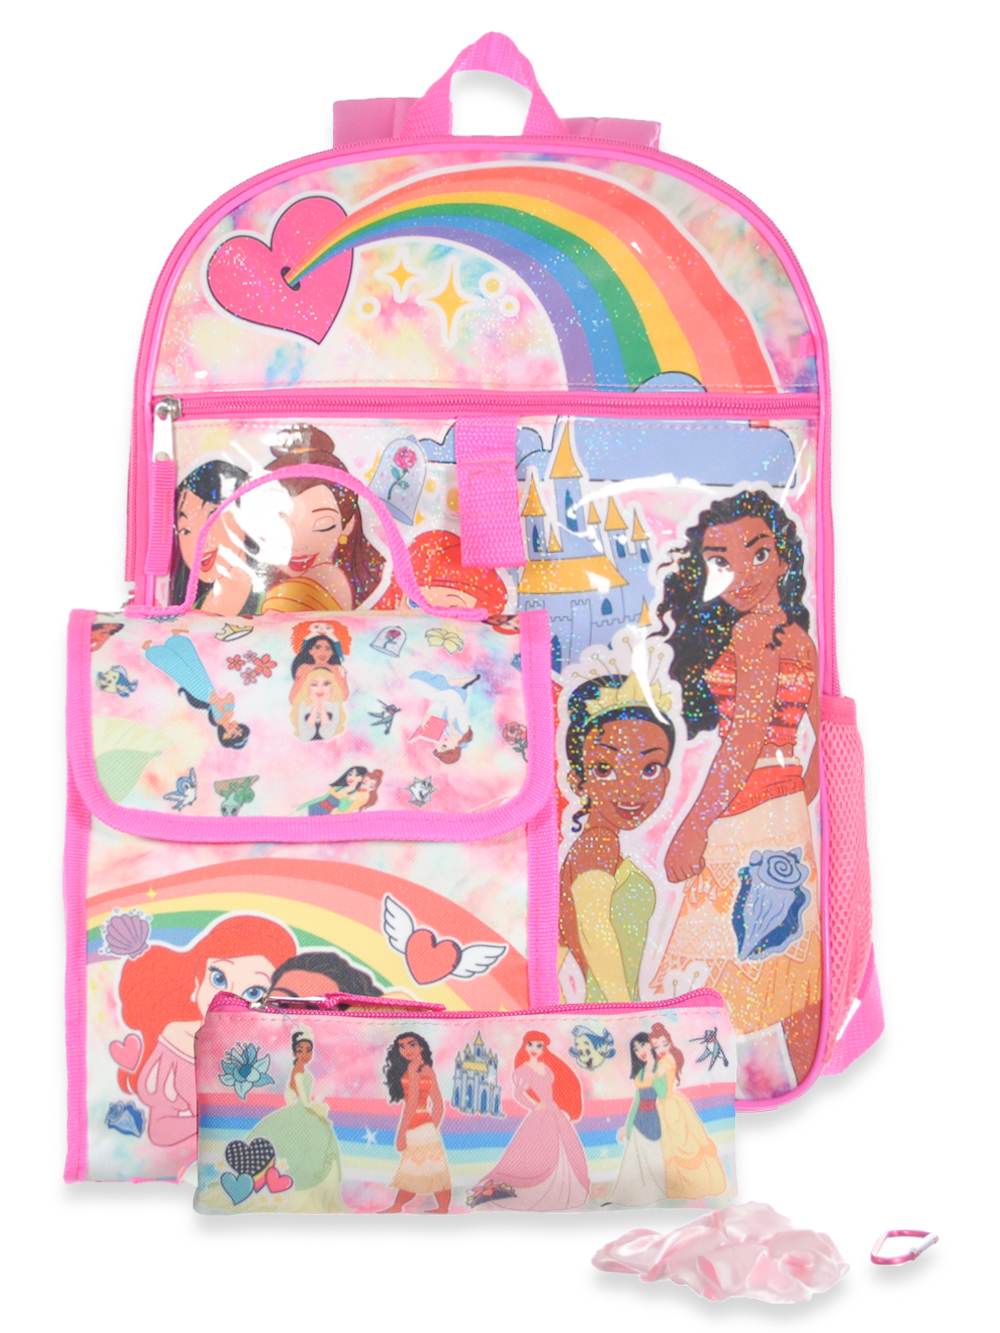 Disney Princesses Girls' 16 Child Backpack with Lunch Bag 5-Piece Set 